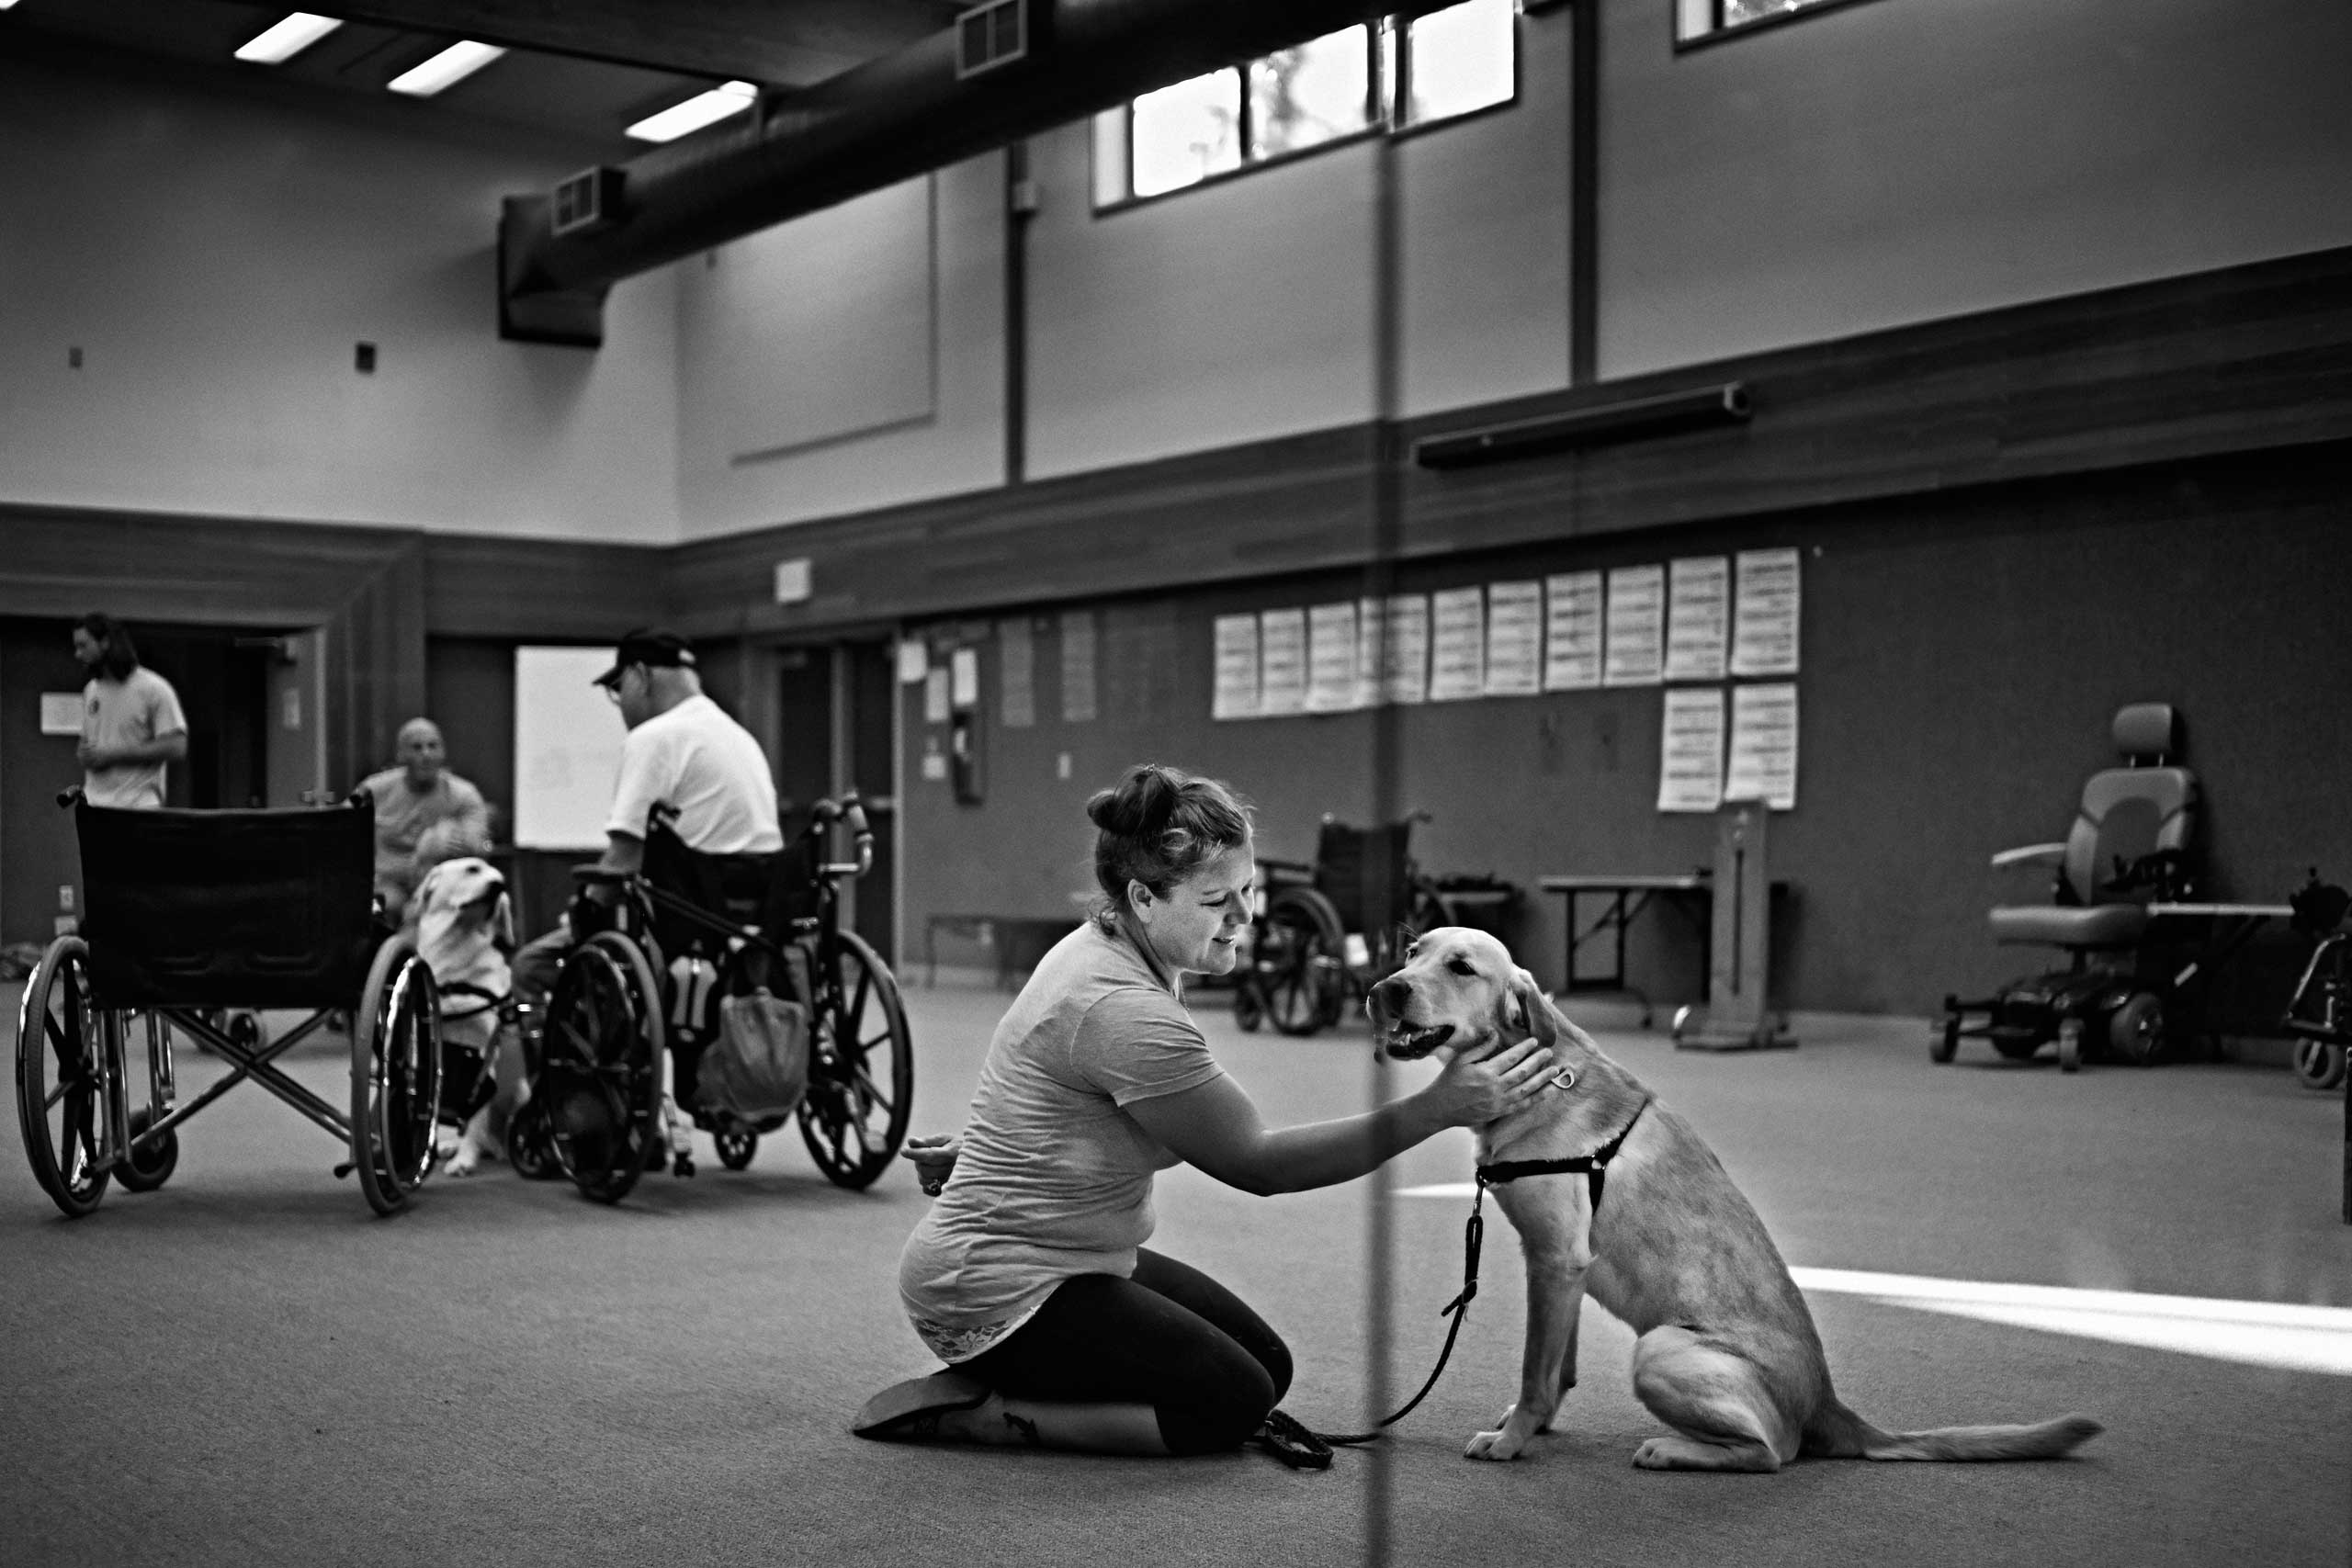 Veteran Laura Jordan works with a service dog at Bergin University of Canine Studies in Rohnert Park, California, United States on September 30, 2014.
                              
                              Jordan is an OIF/OEF Veteran who served from 2003 to 2006. She was attached to a Transportation Brigade at Mare Island in Vallejo and later on to a few various units such as the 467th, 483rd, 481st &amp; the 1397th. She was deployed on short missions to various ports to load and unload heavy artillery such as tanks, jeeps, hummers, and other heavy equipment needed for use in both combat zones.